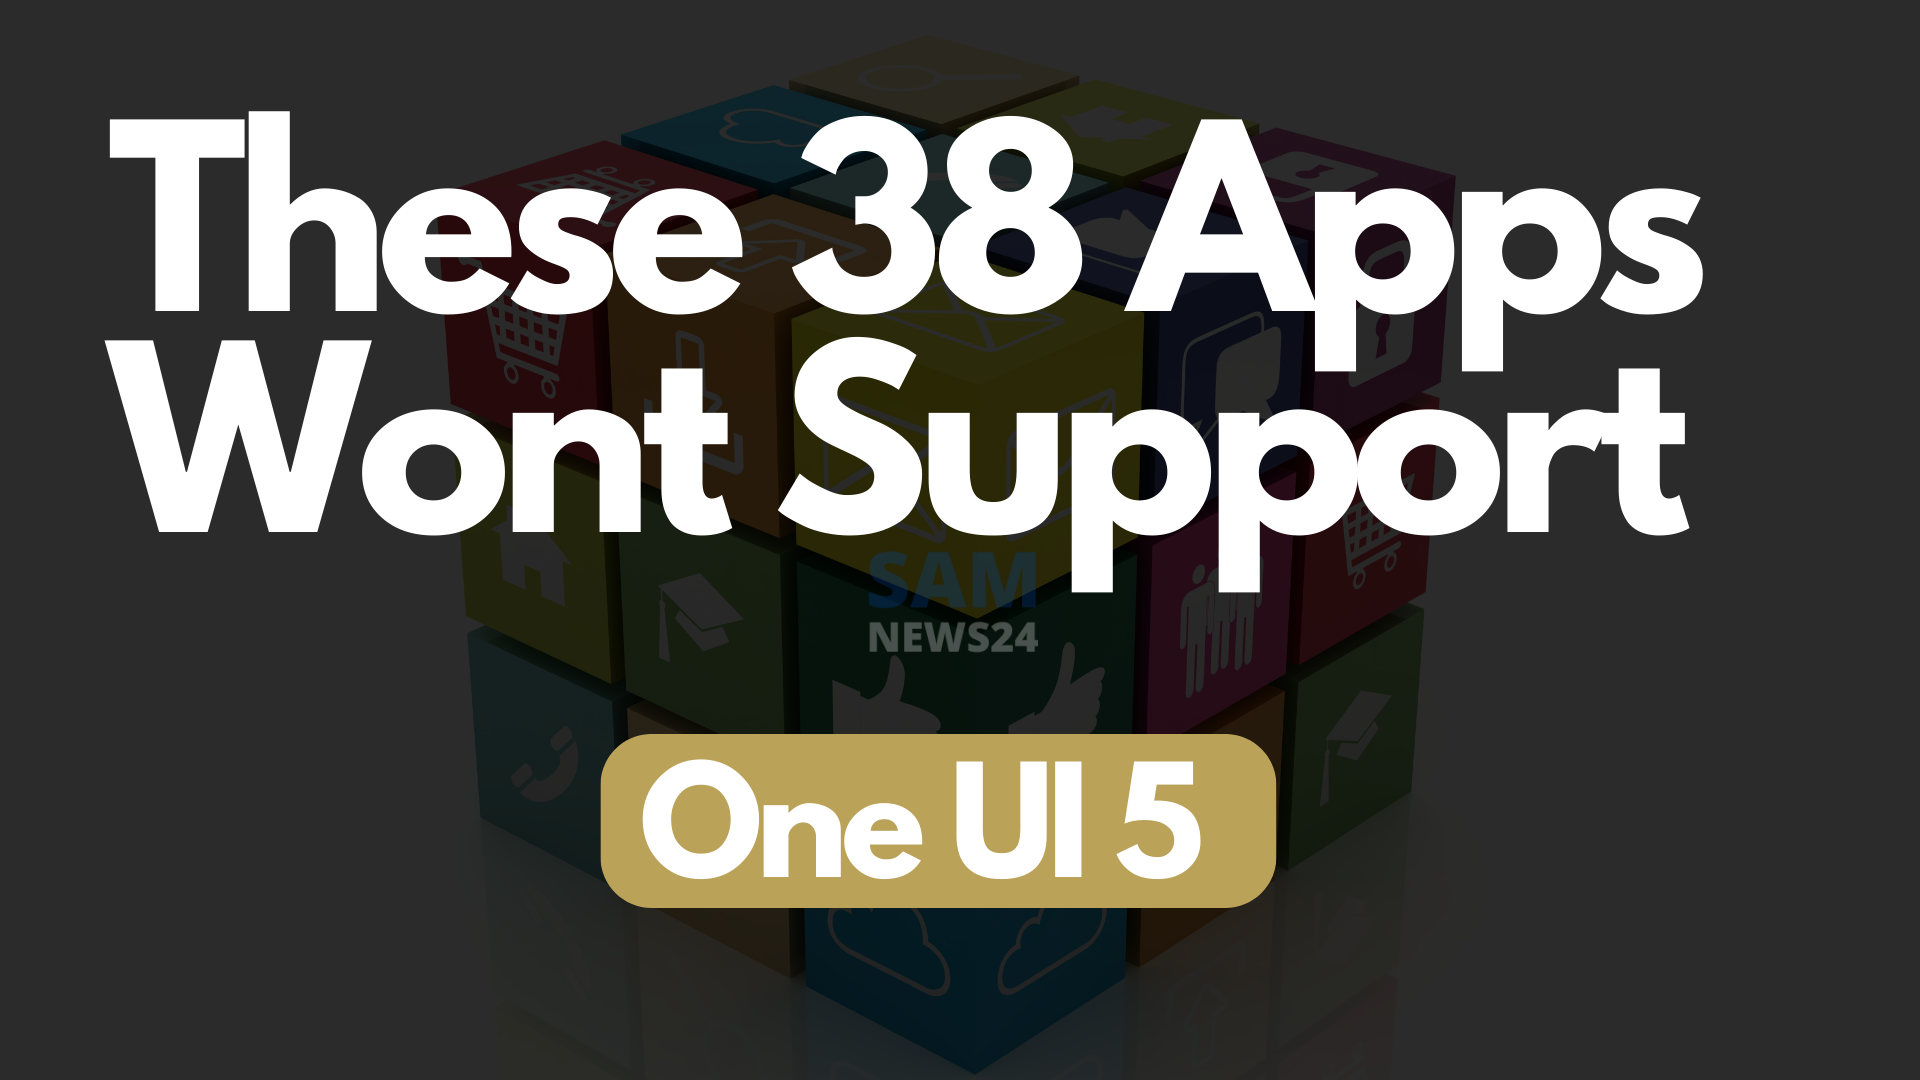 These 38 Apps wont support Samsung One UI 5